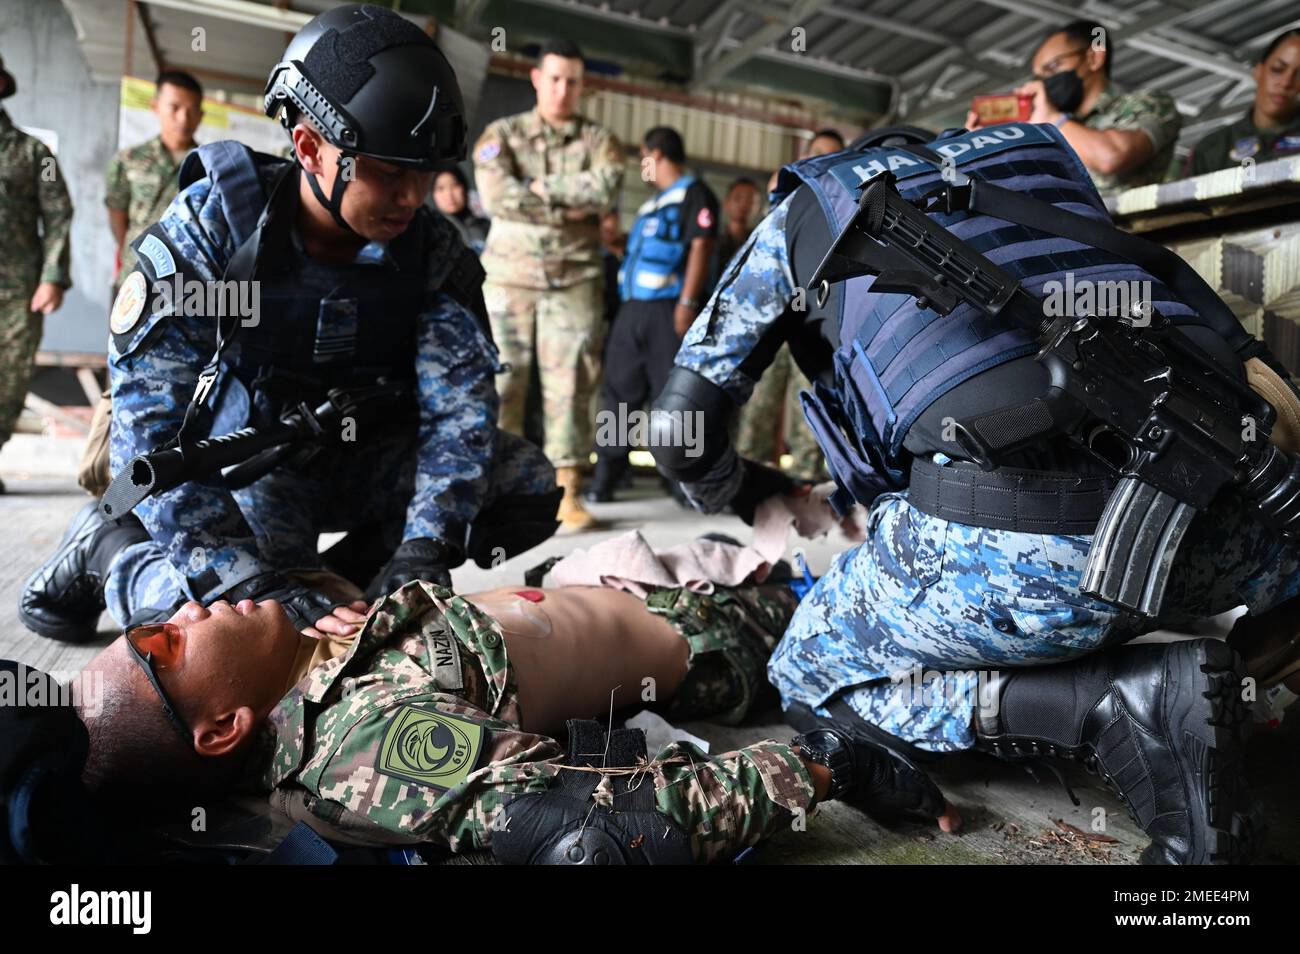 Members of the Royal Malaysian Air Force 211th HANDAU Squadron demonstrate tactical combat casualty care on a Royal Malaysian Air Force medic as part of a medical subject matter expert exchange at Subang Air Base, Malaysia Aug. 16, 2022. These scenarios are  designed to teach participants life saving techniques and the most effective trauma care in response to natural disasters, accidents or hostile situations. Stock Photo